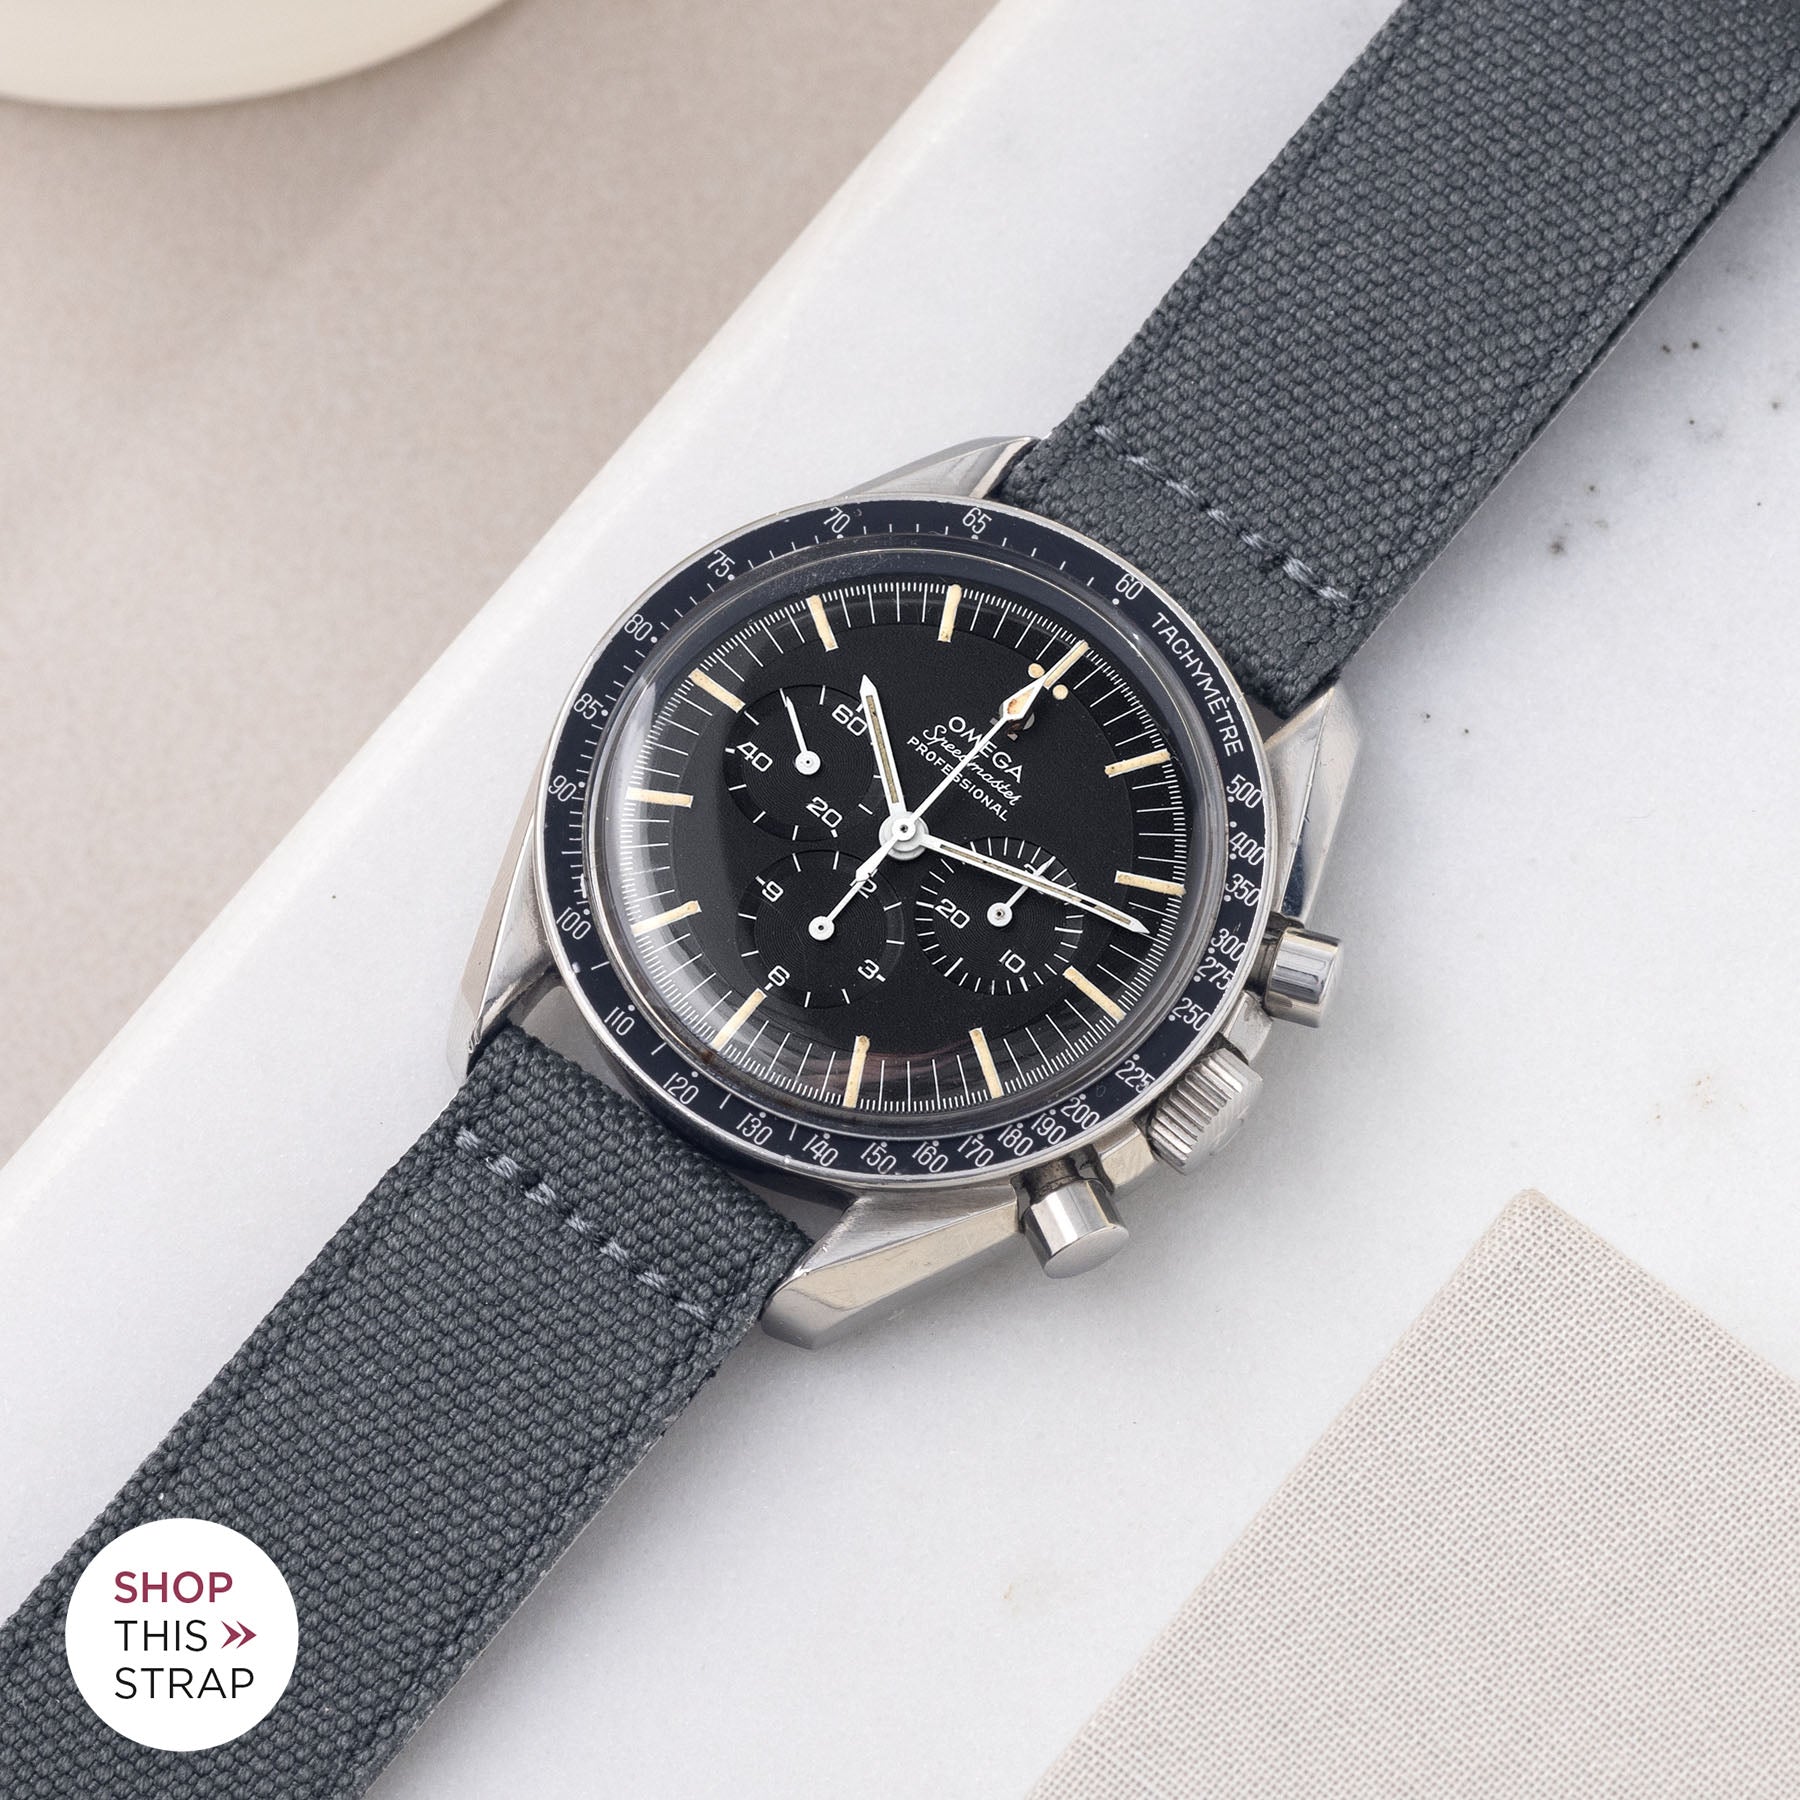 Bulang and Sons_Strapguide_Omega Speedmaster Professional_Safari Graphite Canvas Watch Strap